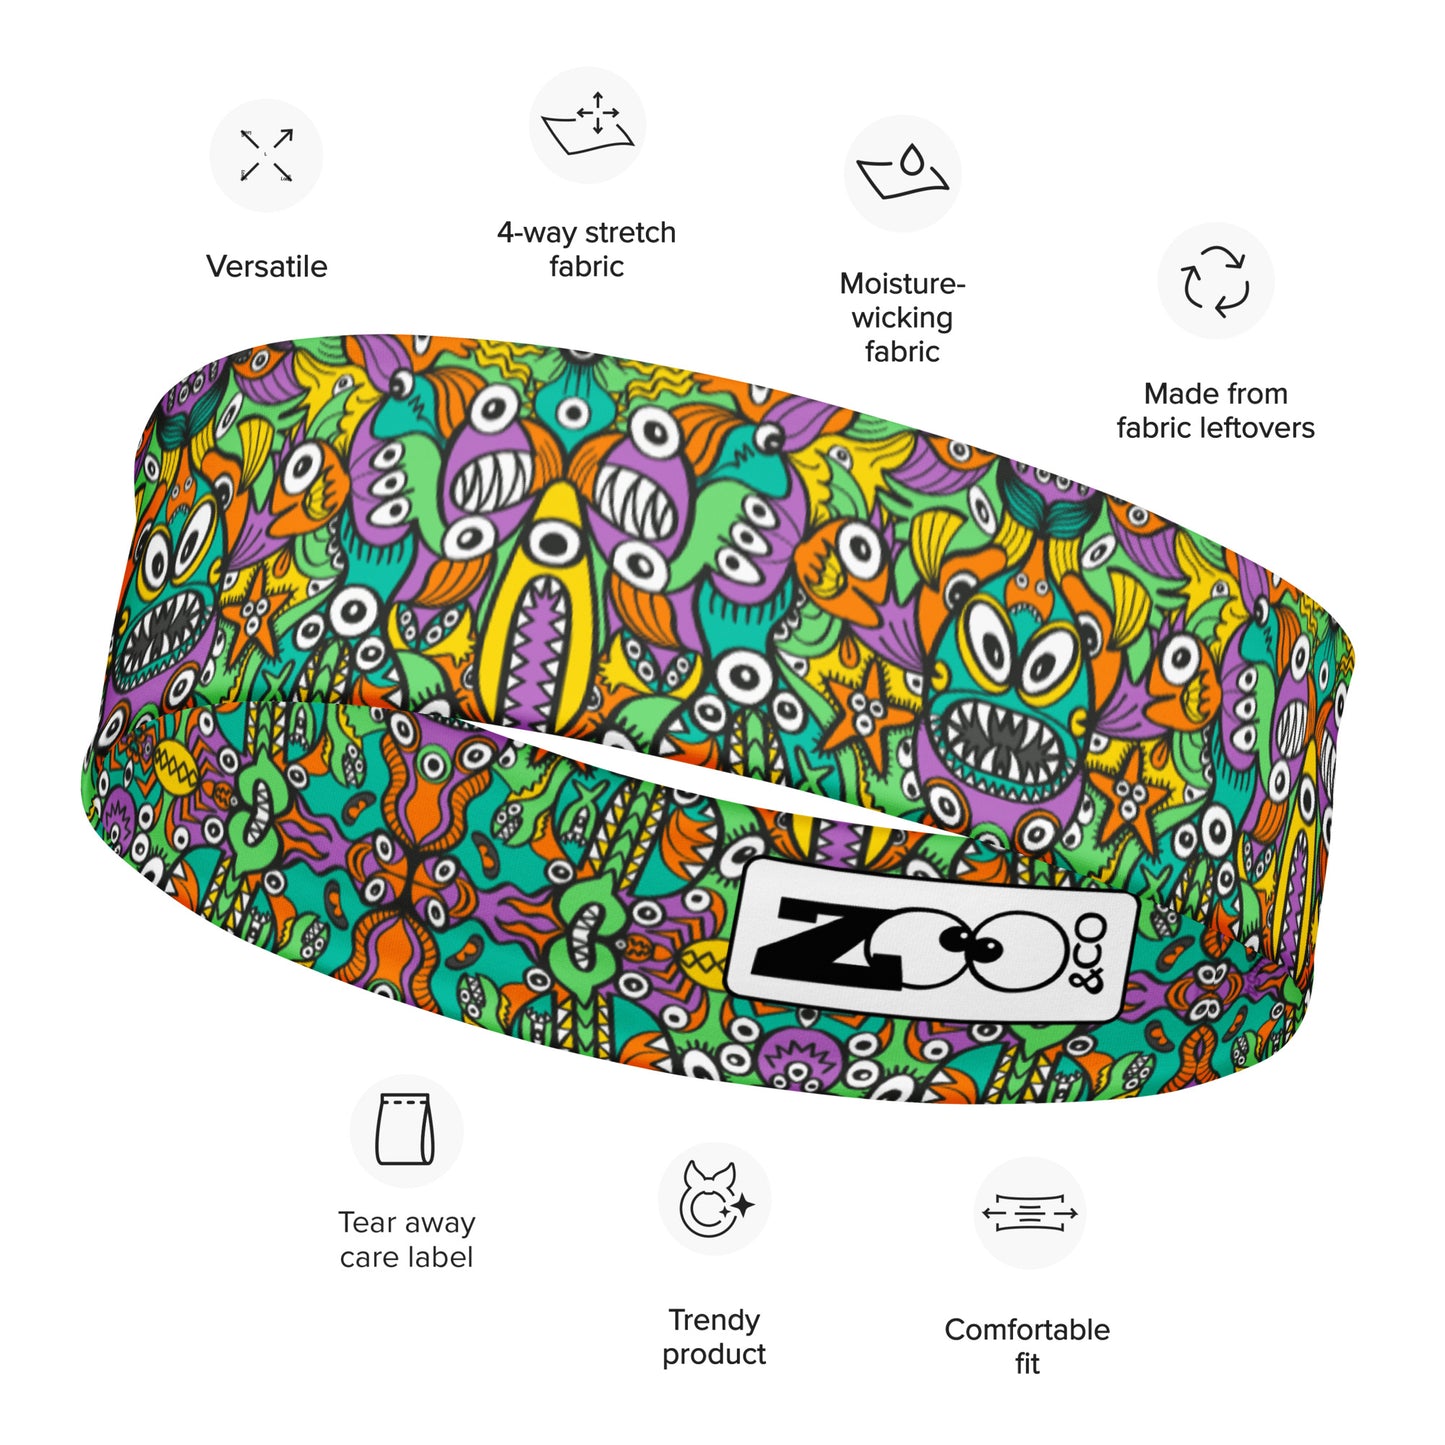 The vast ocean is full of doodle critters Headband. Specifications